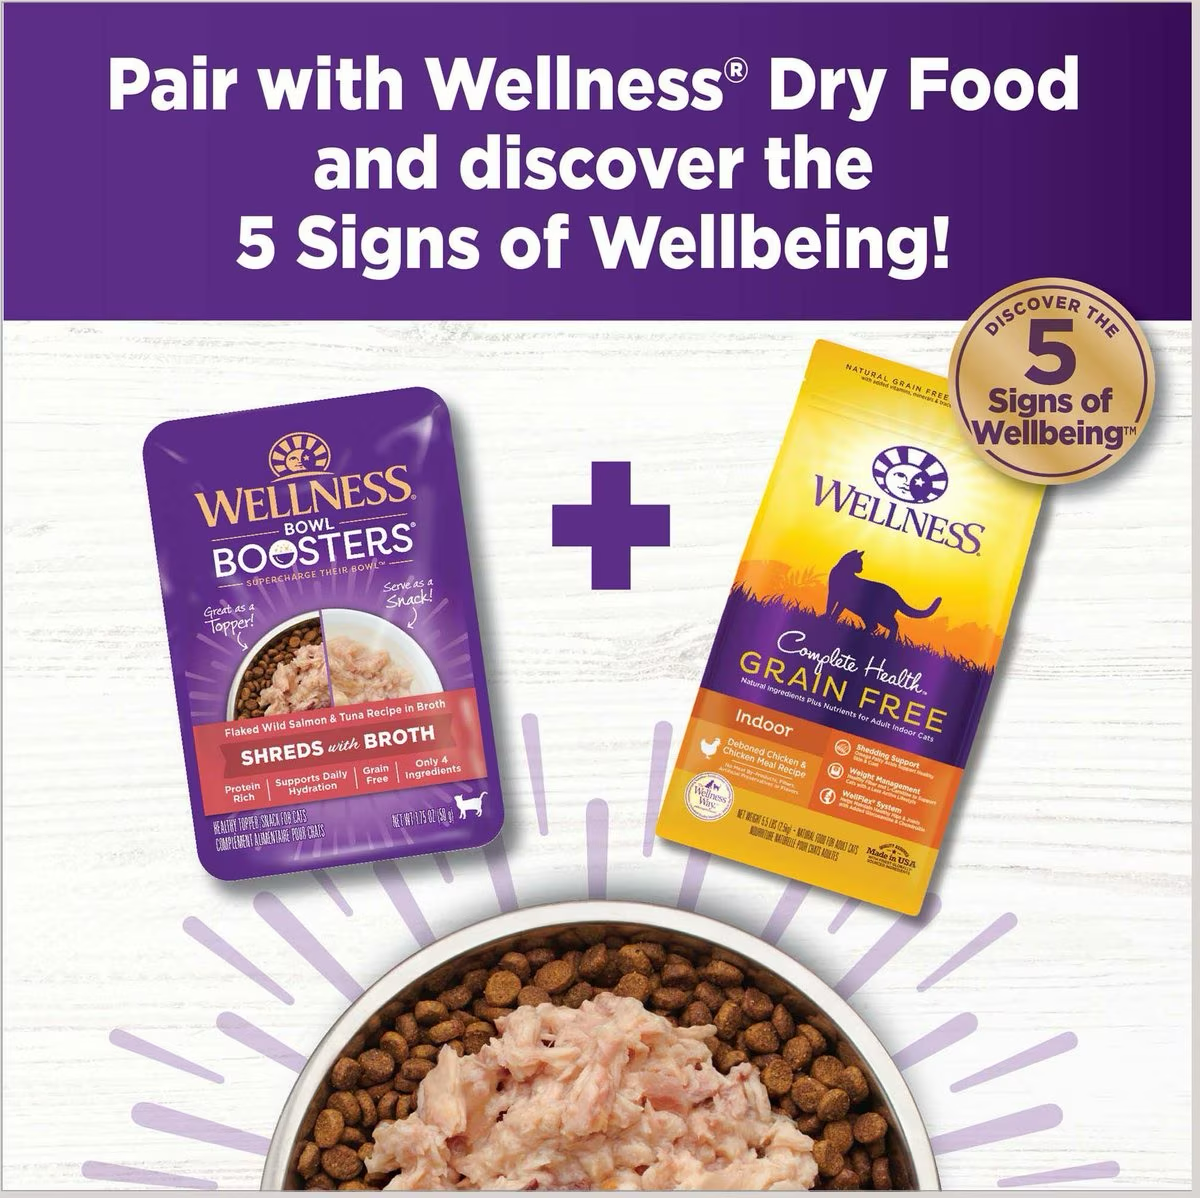 Wellness Bowl Boosters Flaked Salmon & Tuna Wet Cat Topper  Canned Cat Food  | PetMax Canada